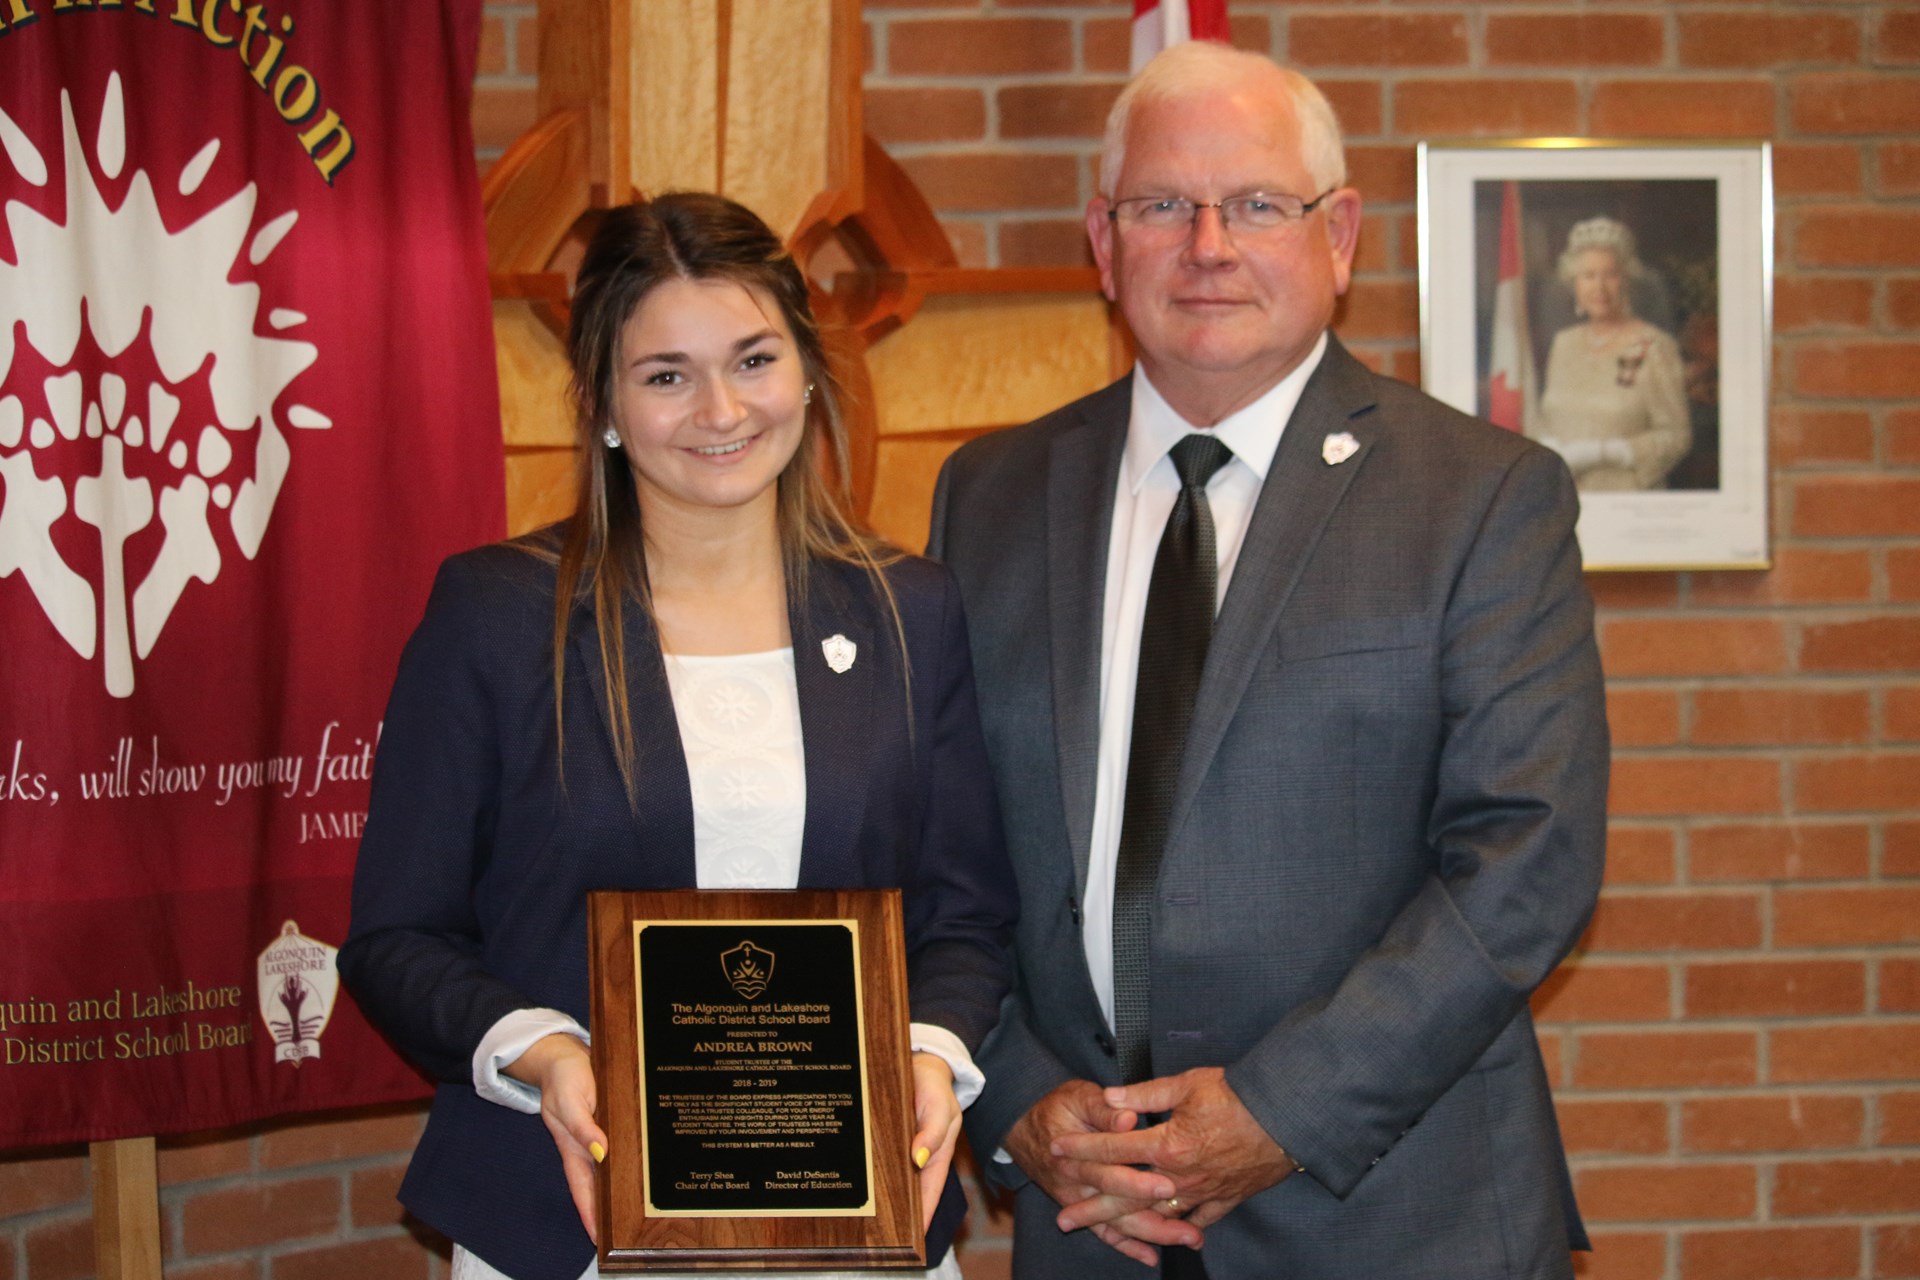 Chair of the Board, Terry Shea presents outgoing Student Trustee with a token of appreciation